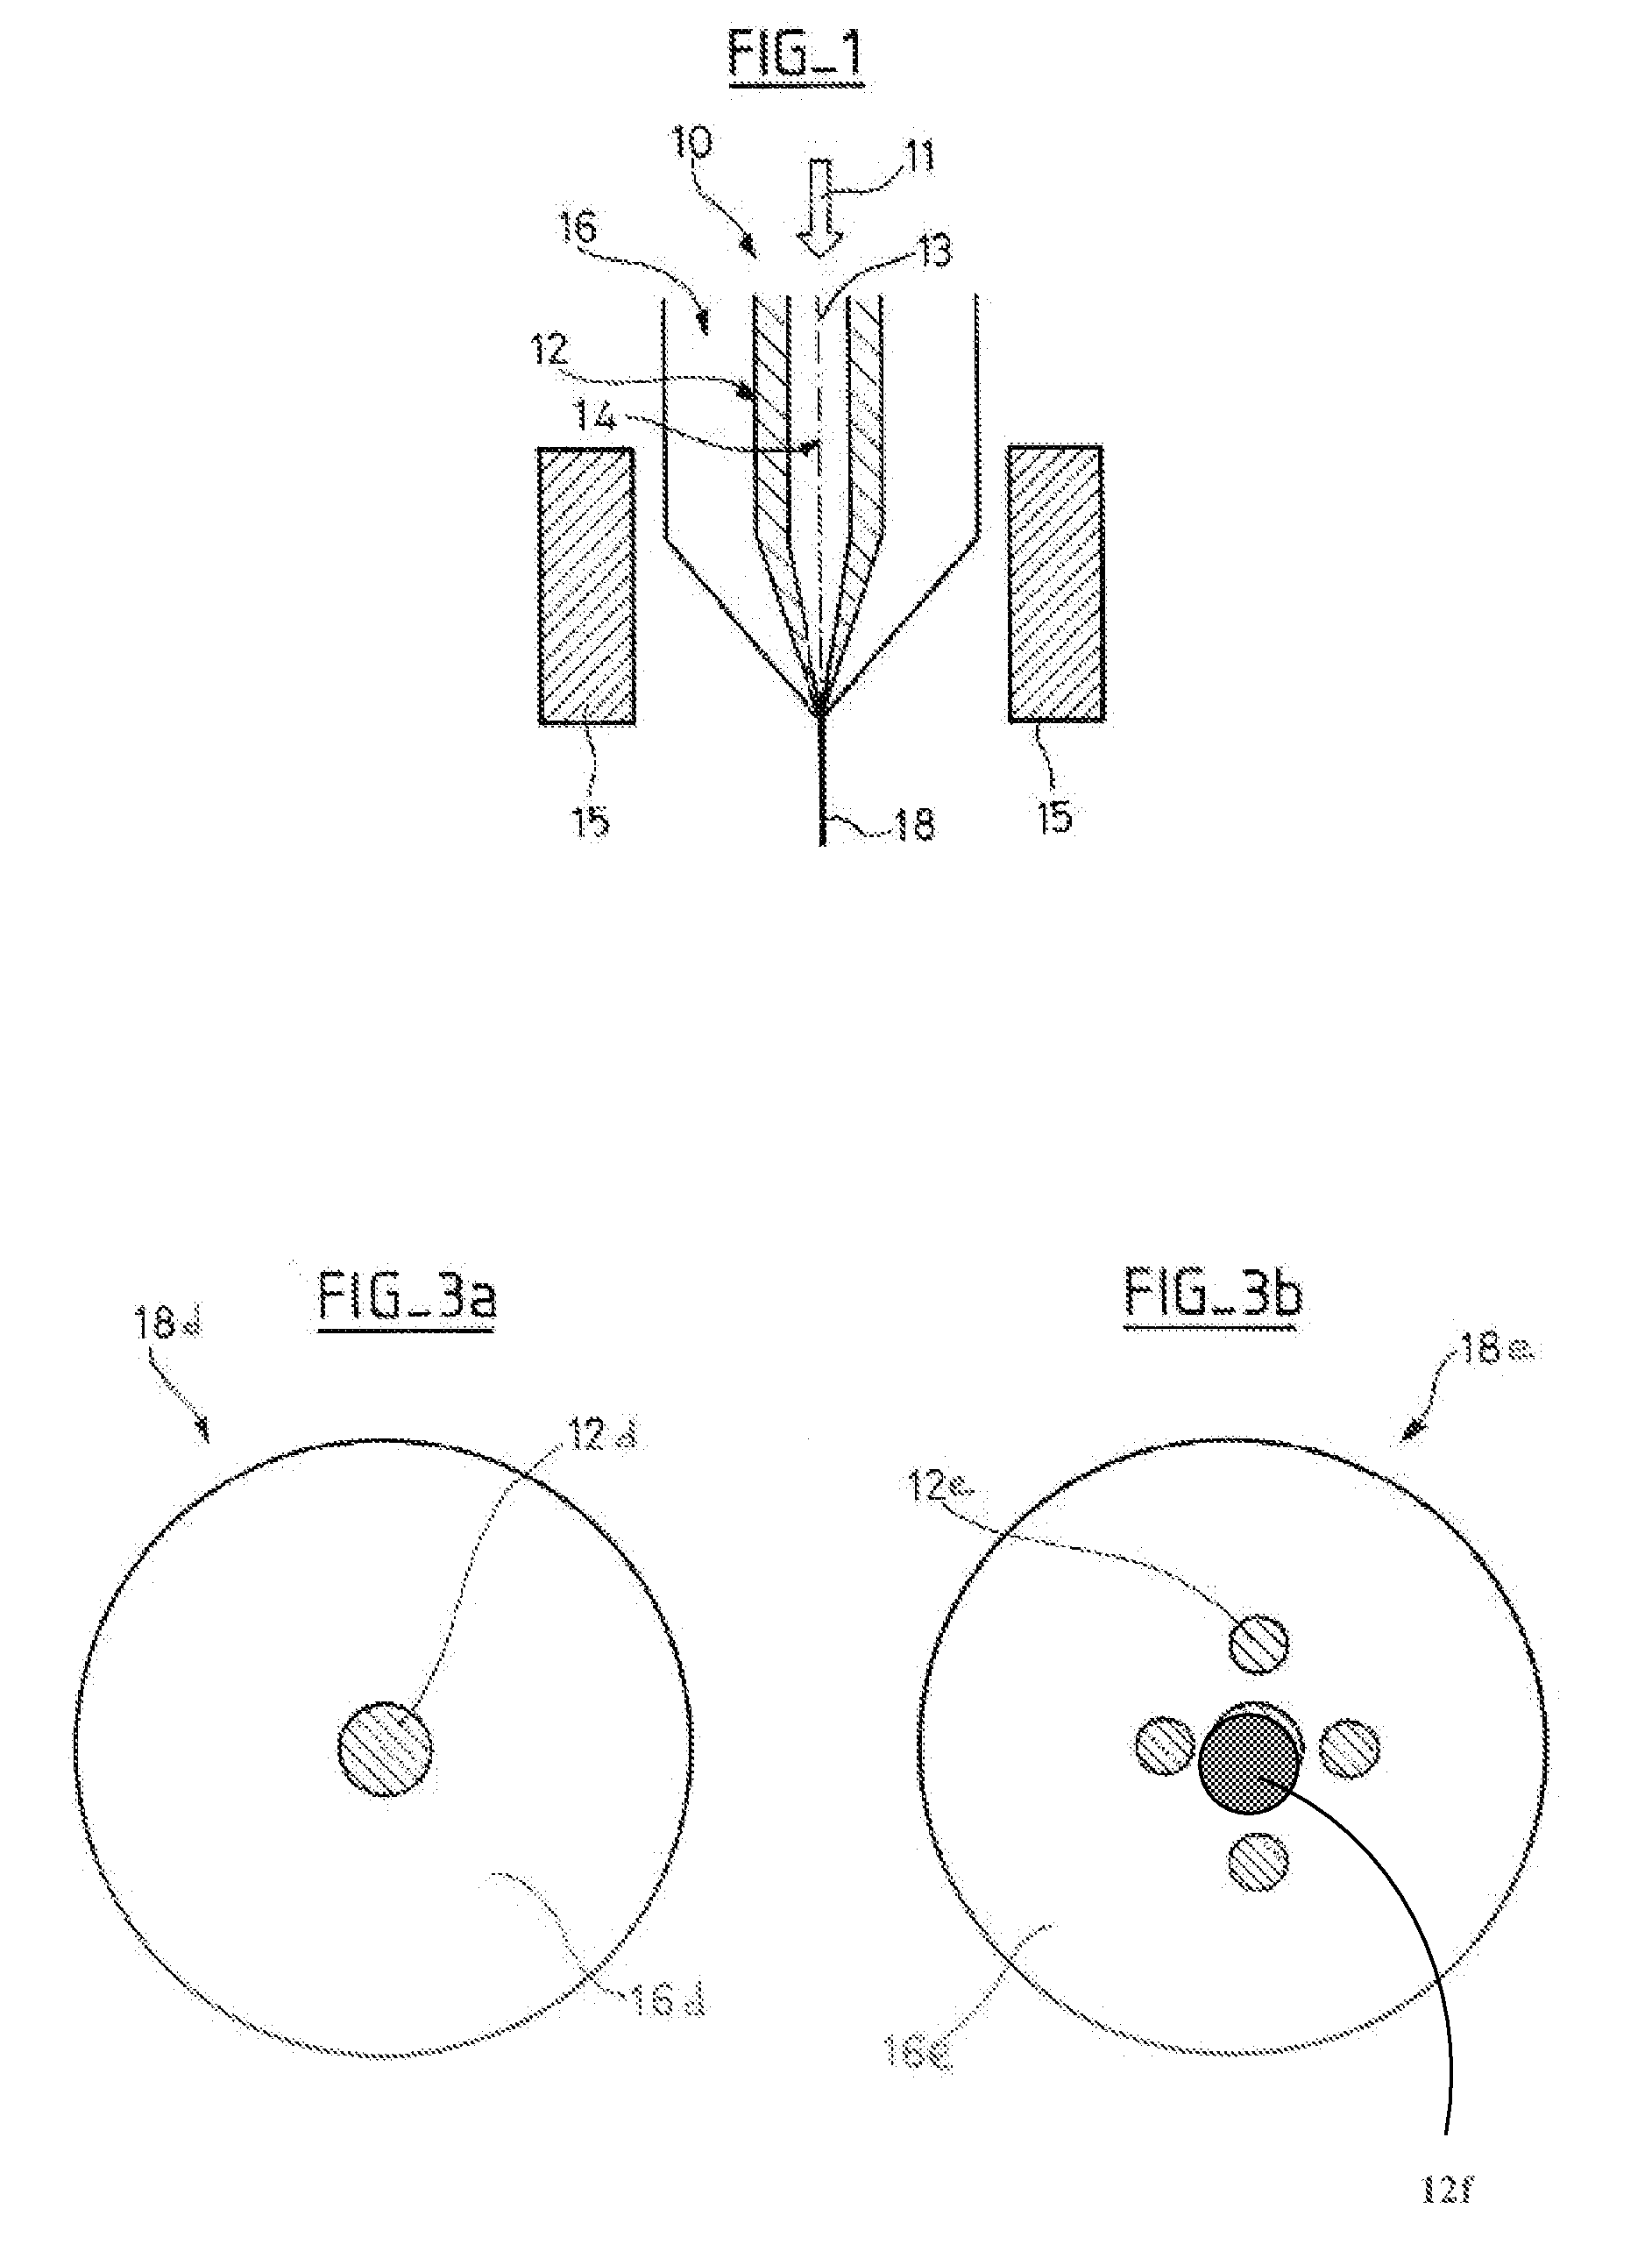 Method for Making an Optical Fiber Comprising Nanoparticles and Preform Used in the Manufacture of Such a Fiber